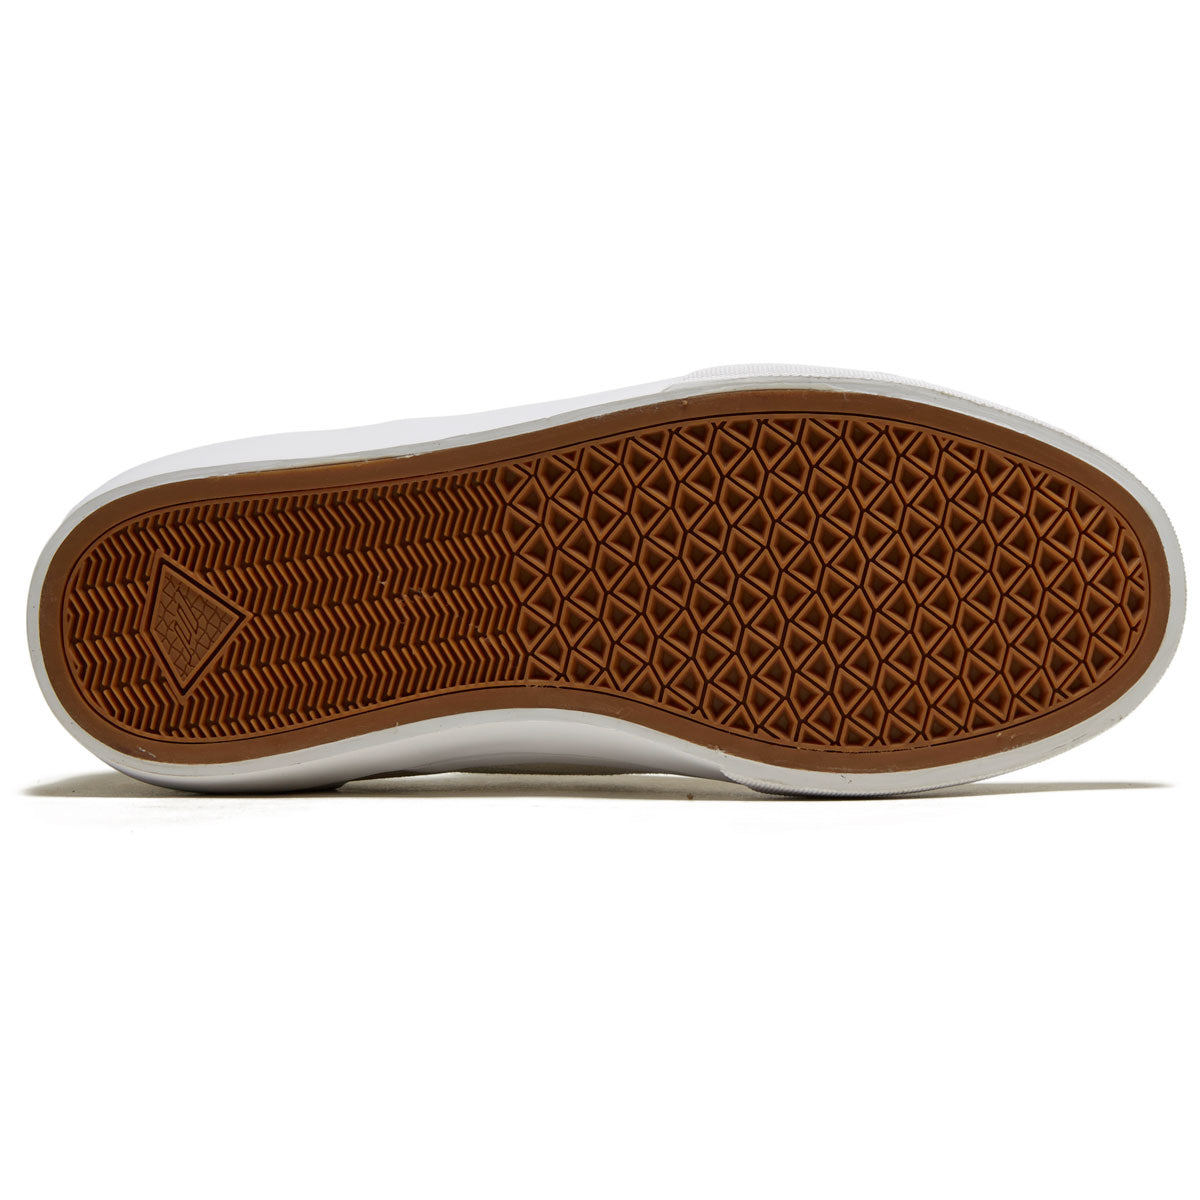 Emerica Wino G6 Slip-on This Is Skateboarding Shoes - White image 4